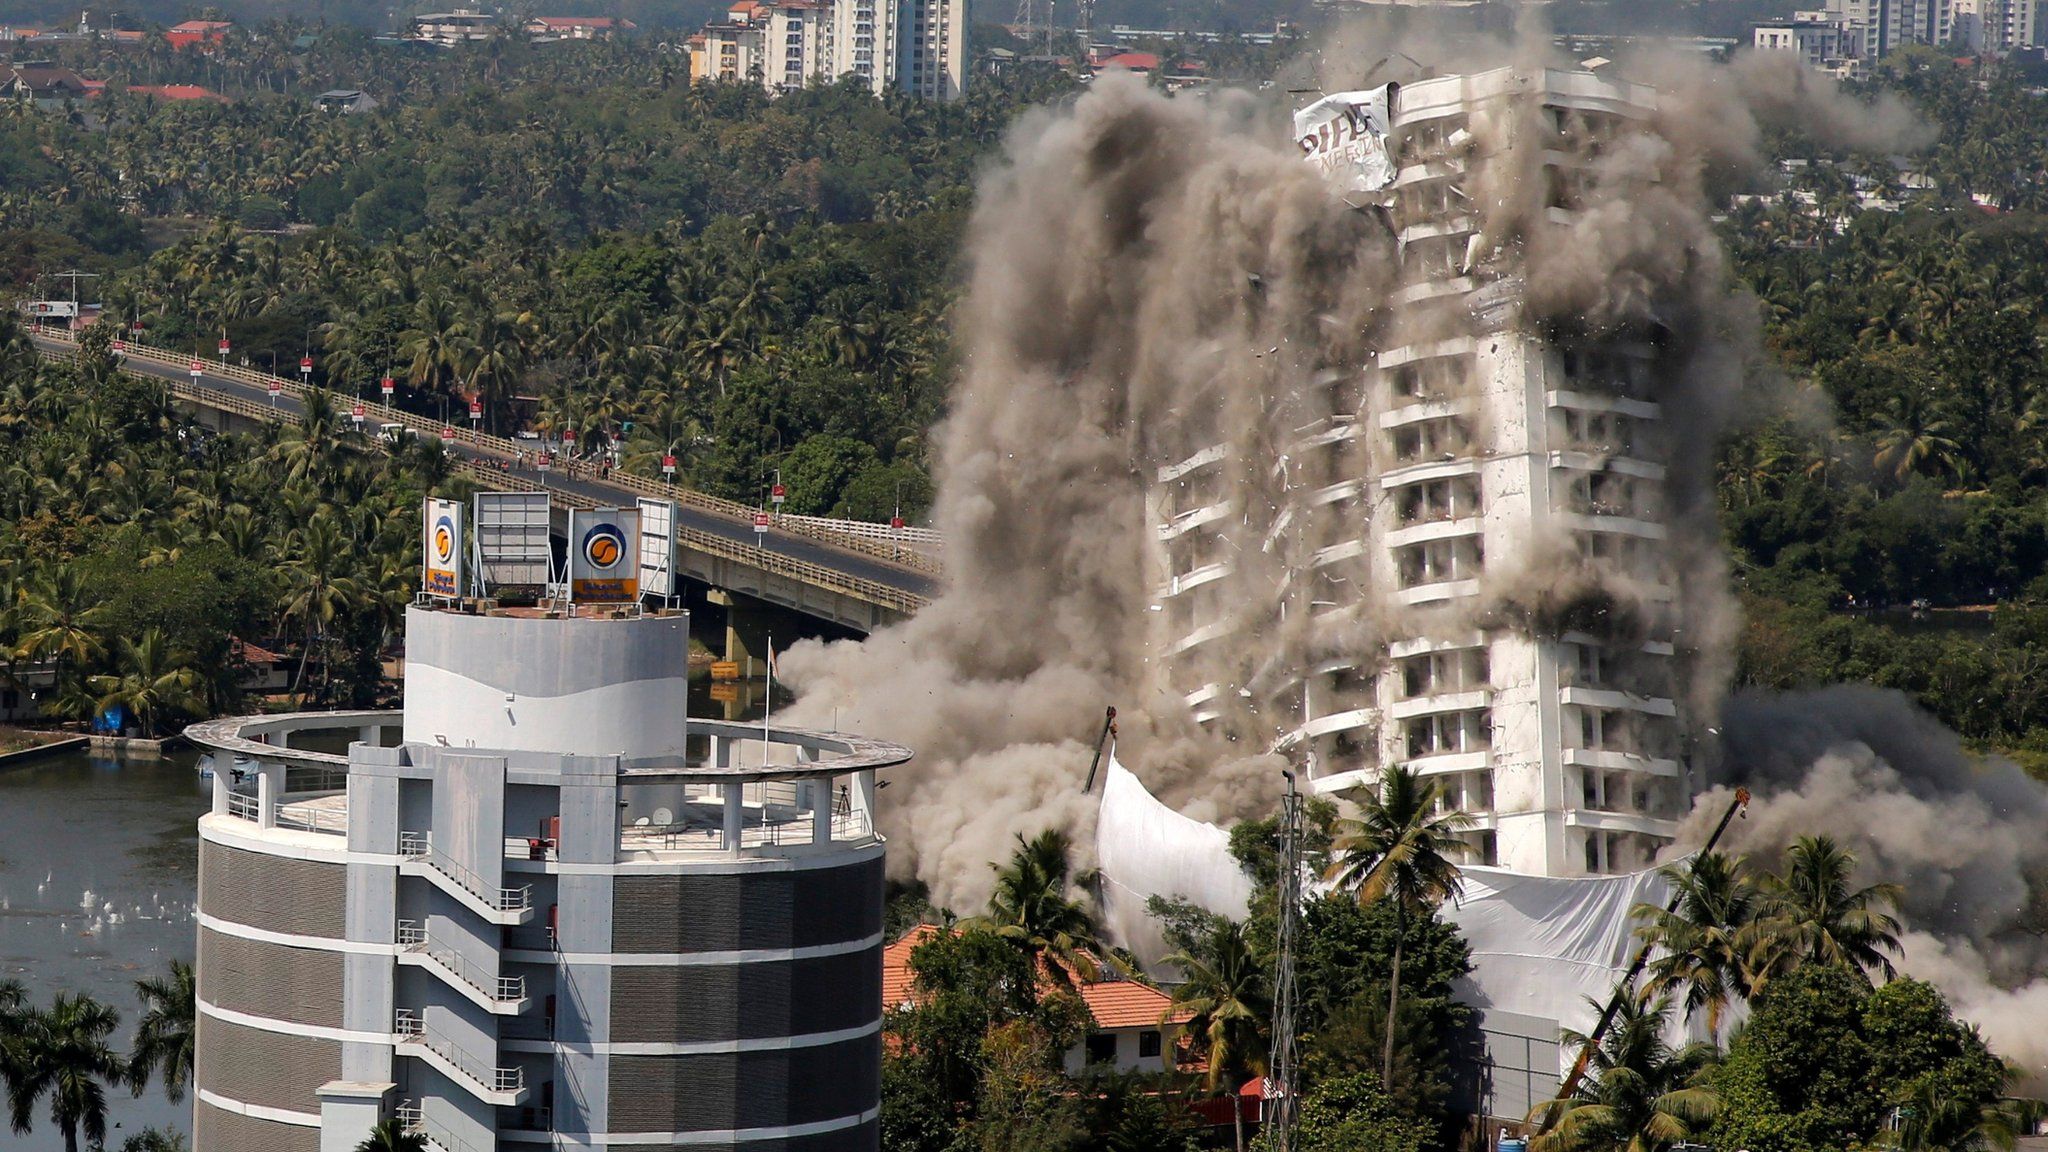 A high-rise residential building is demolished with controlled blasting in Kochi, India, 11 January, 2020.